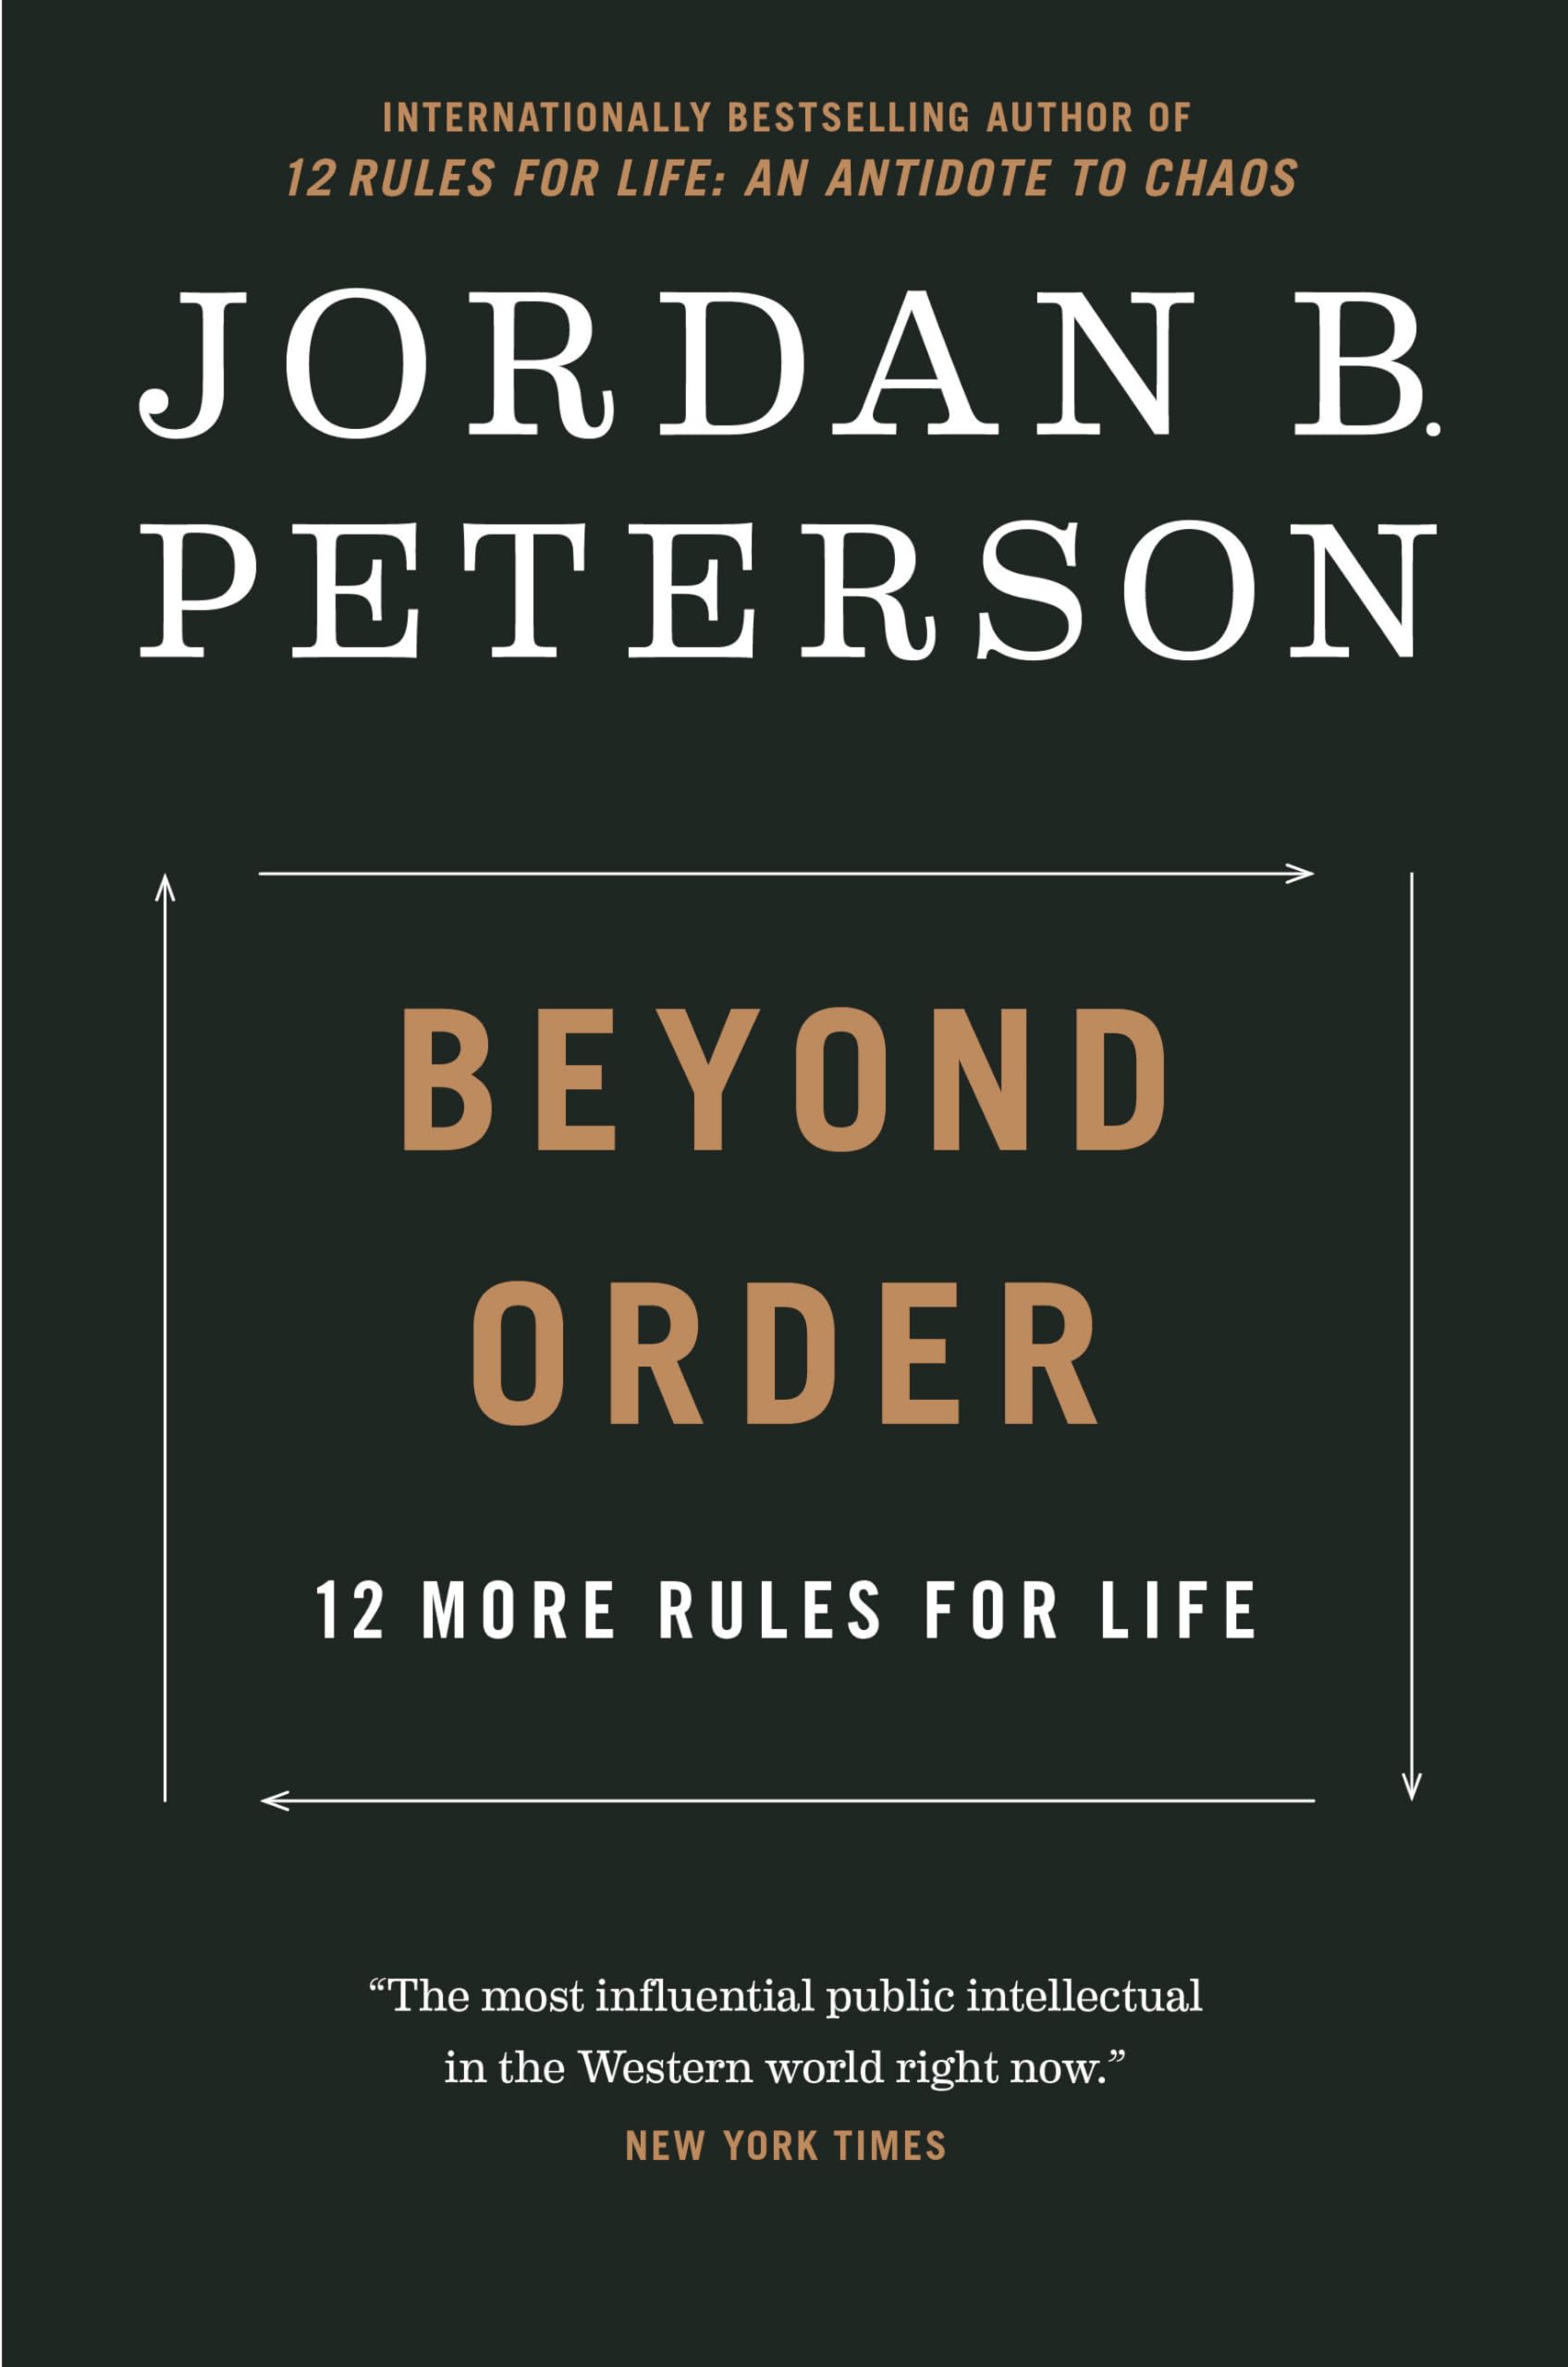 Beyond Order: 12 More Rules for Life by Peterson, Jordan B.